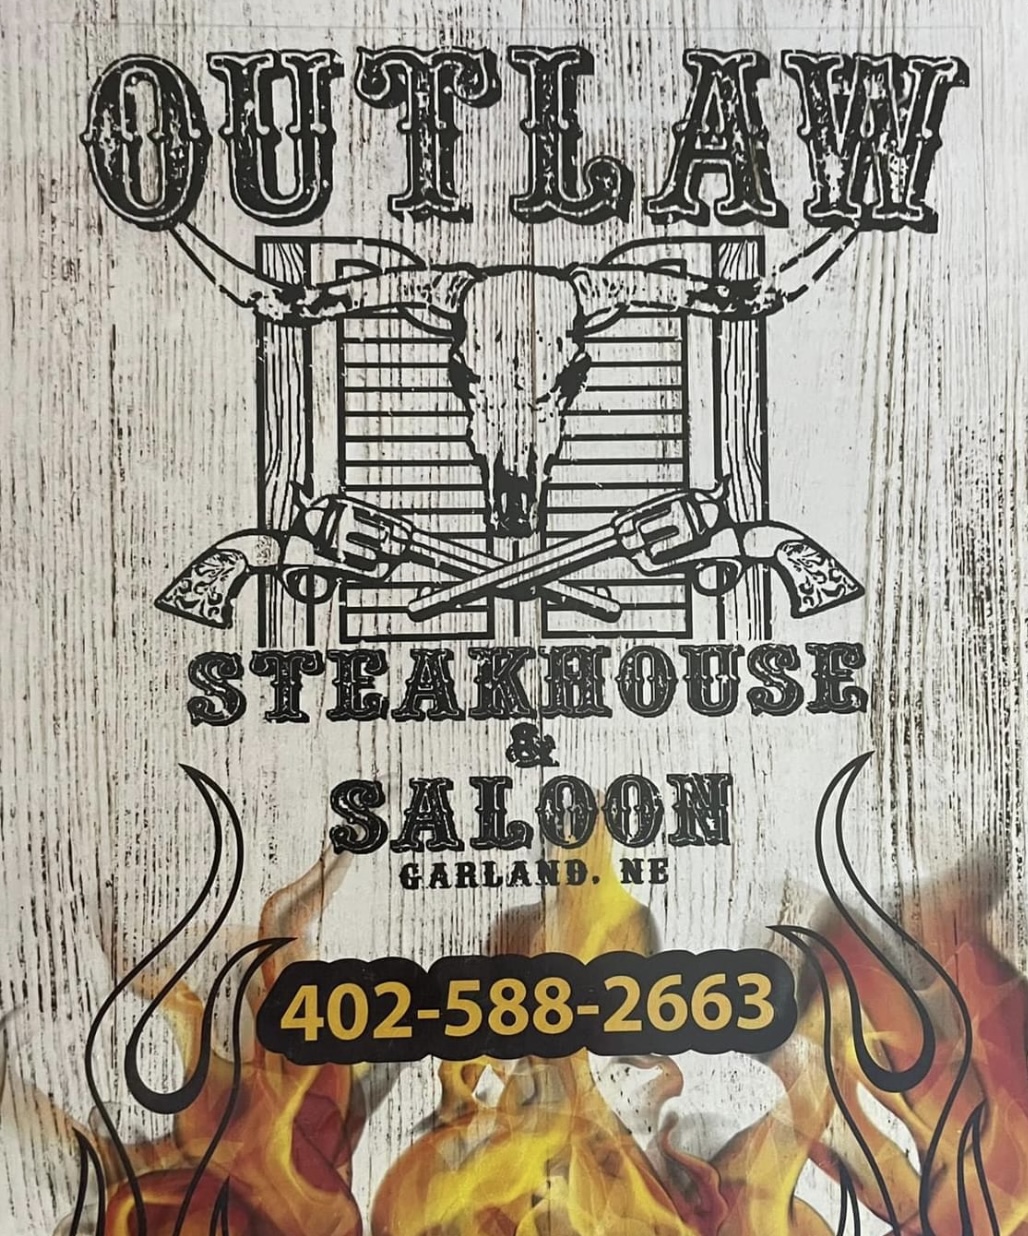 Outlaw Steakhouse & Saloon